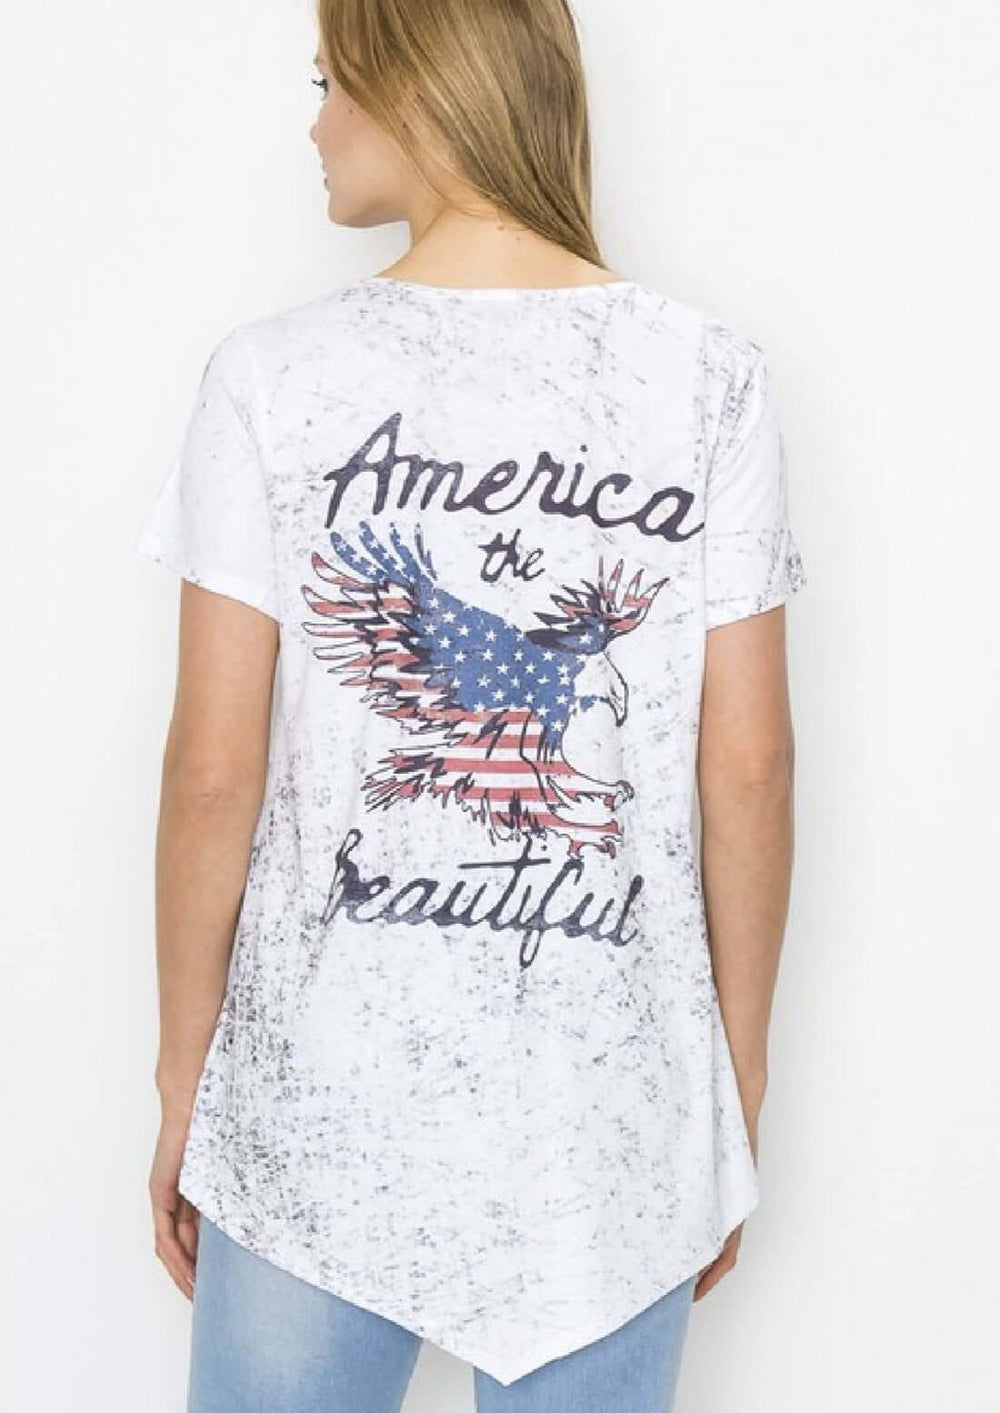 Ladies America The Beautiful Graphic Dye Sublimated Asymmetrical Hem Tee Perfect for 4th of July | Made in USA | Classy Cozy Cool Women's Made in America Boutique